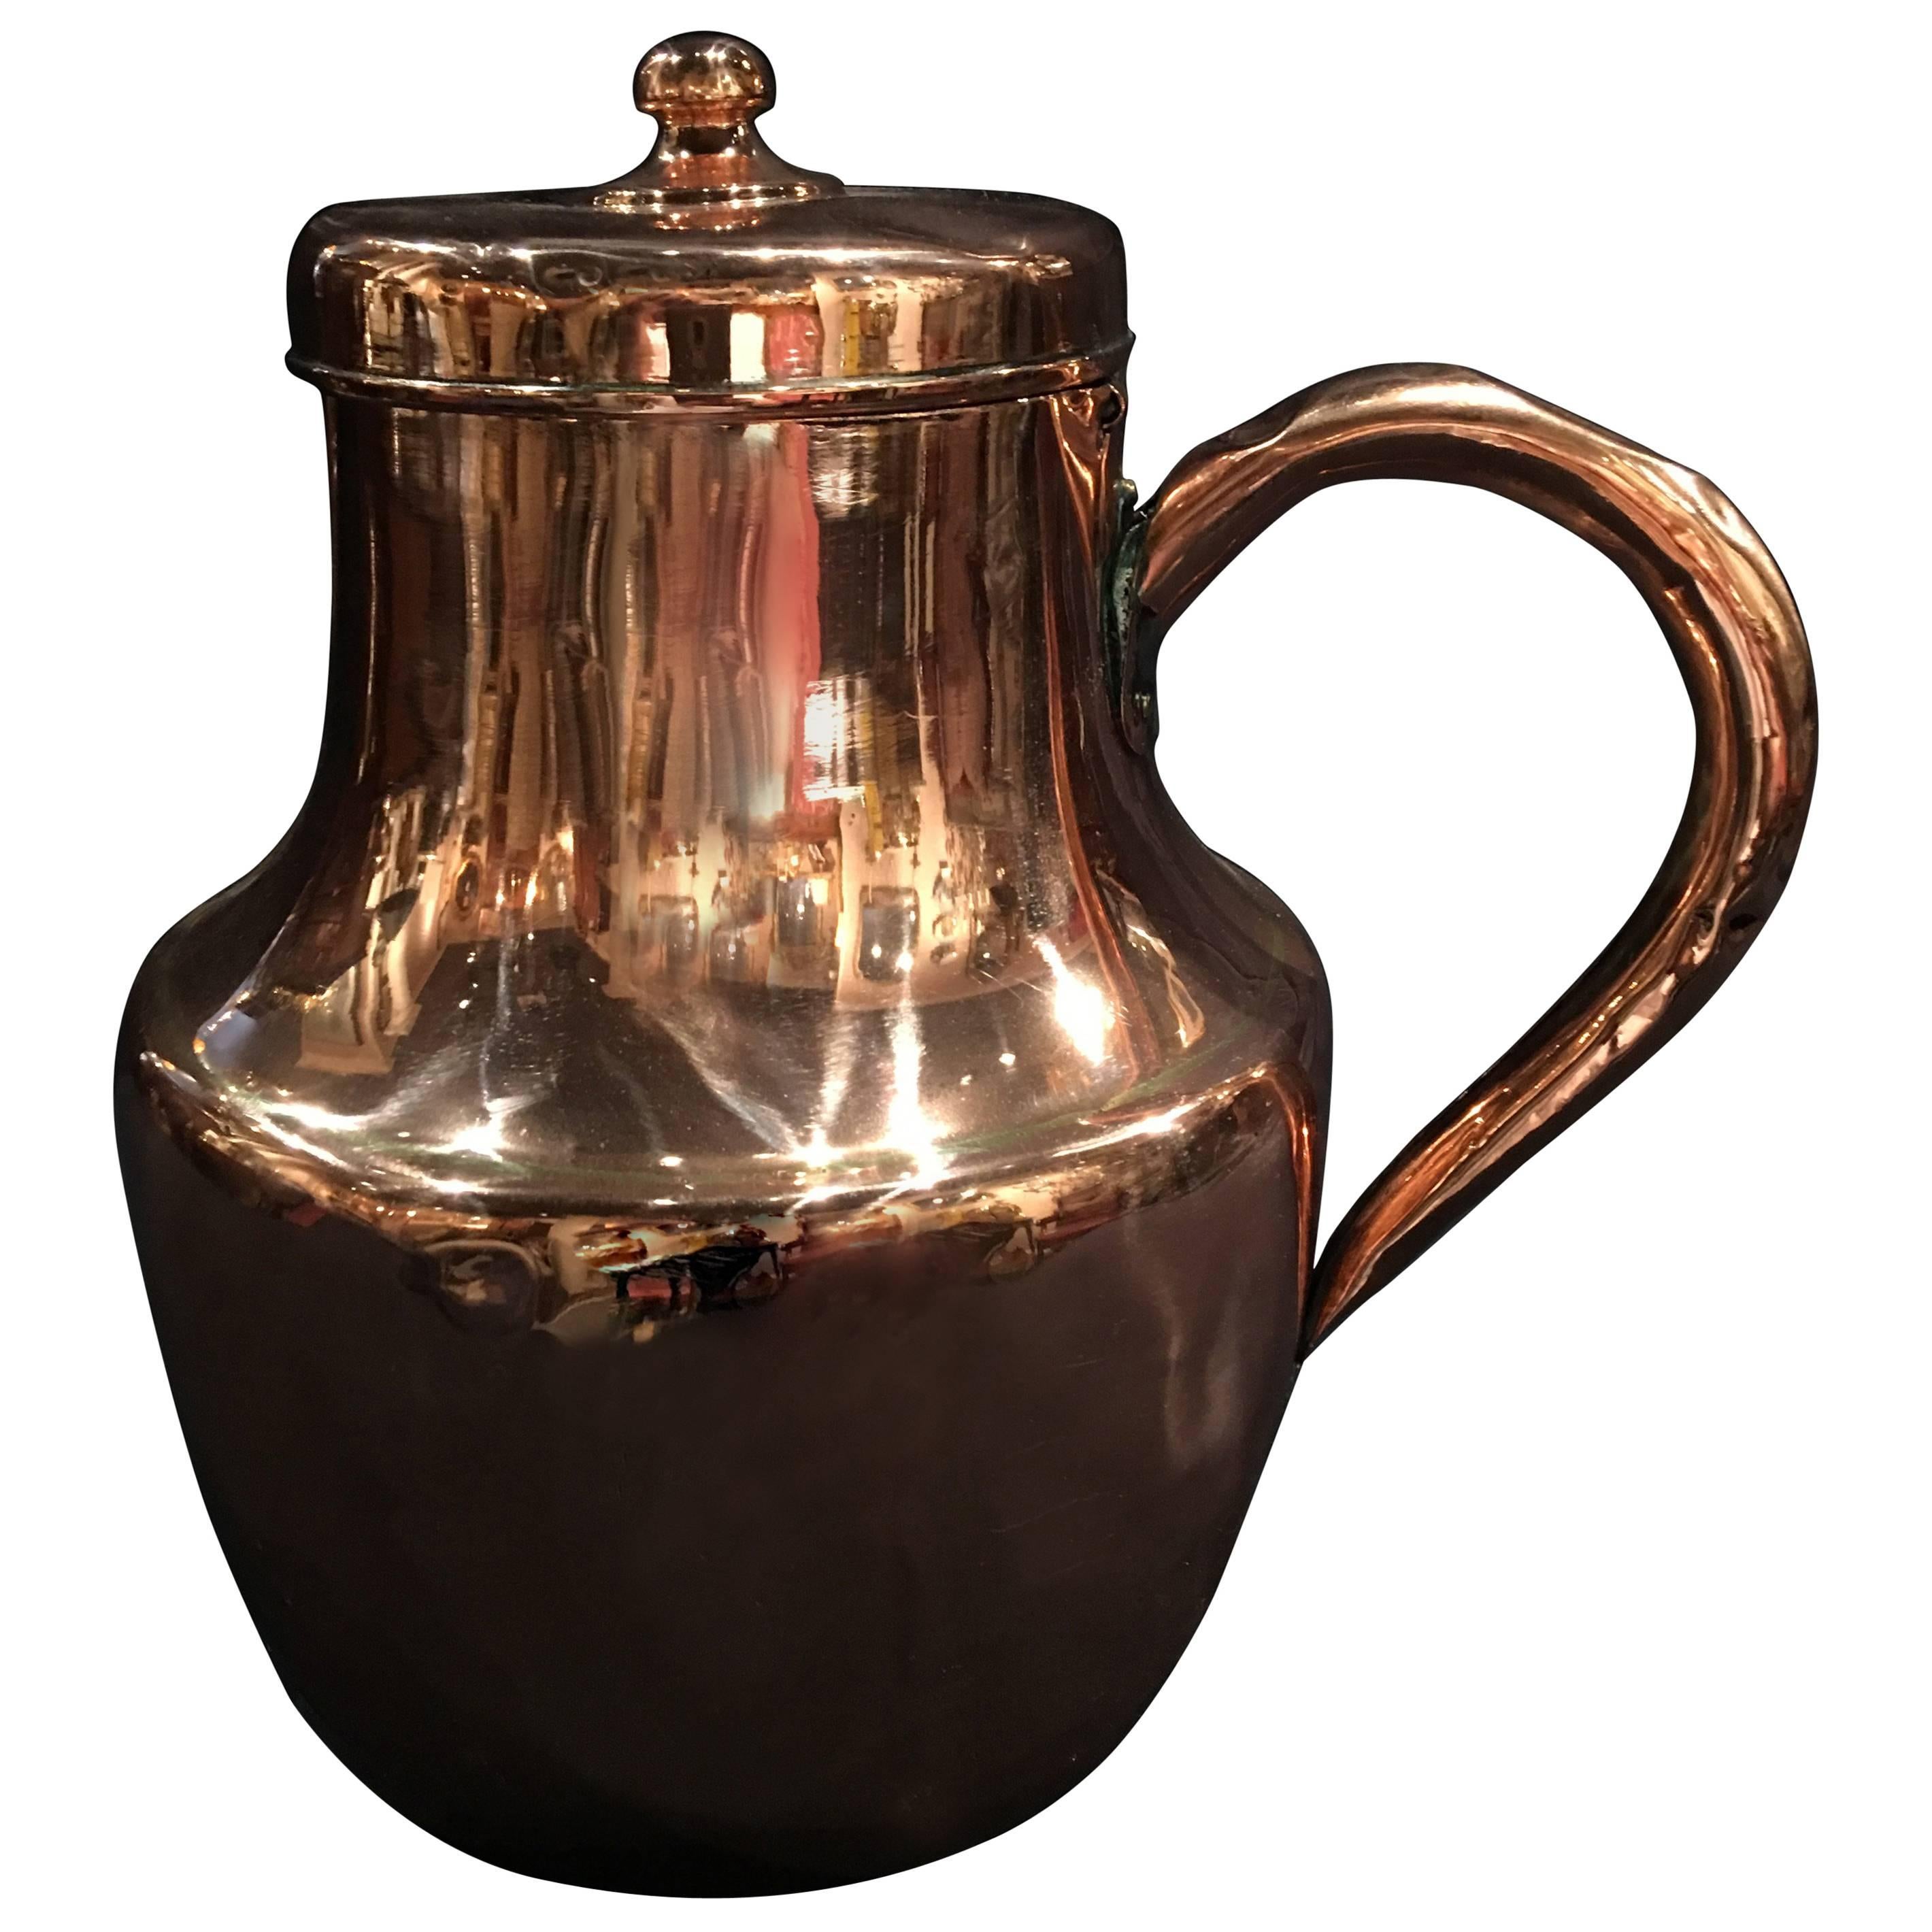 French Polished Copper Pitcher or Jug with Handle, 19th Century